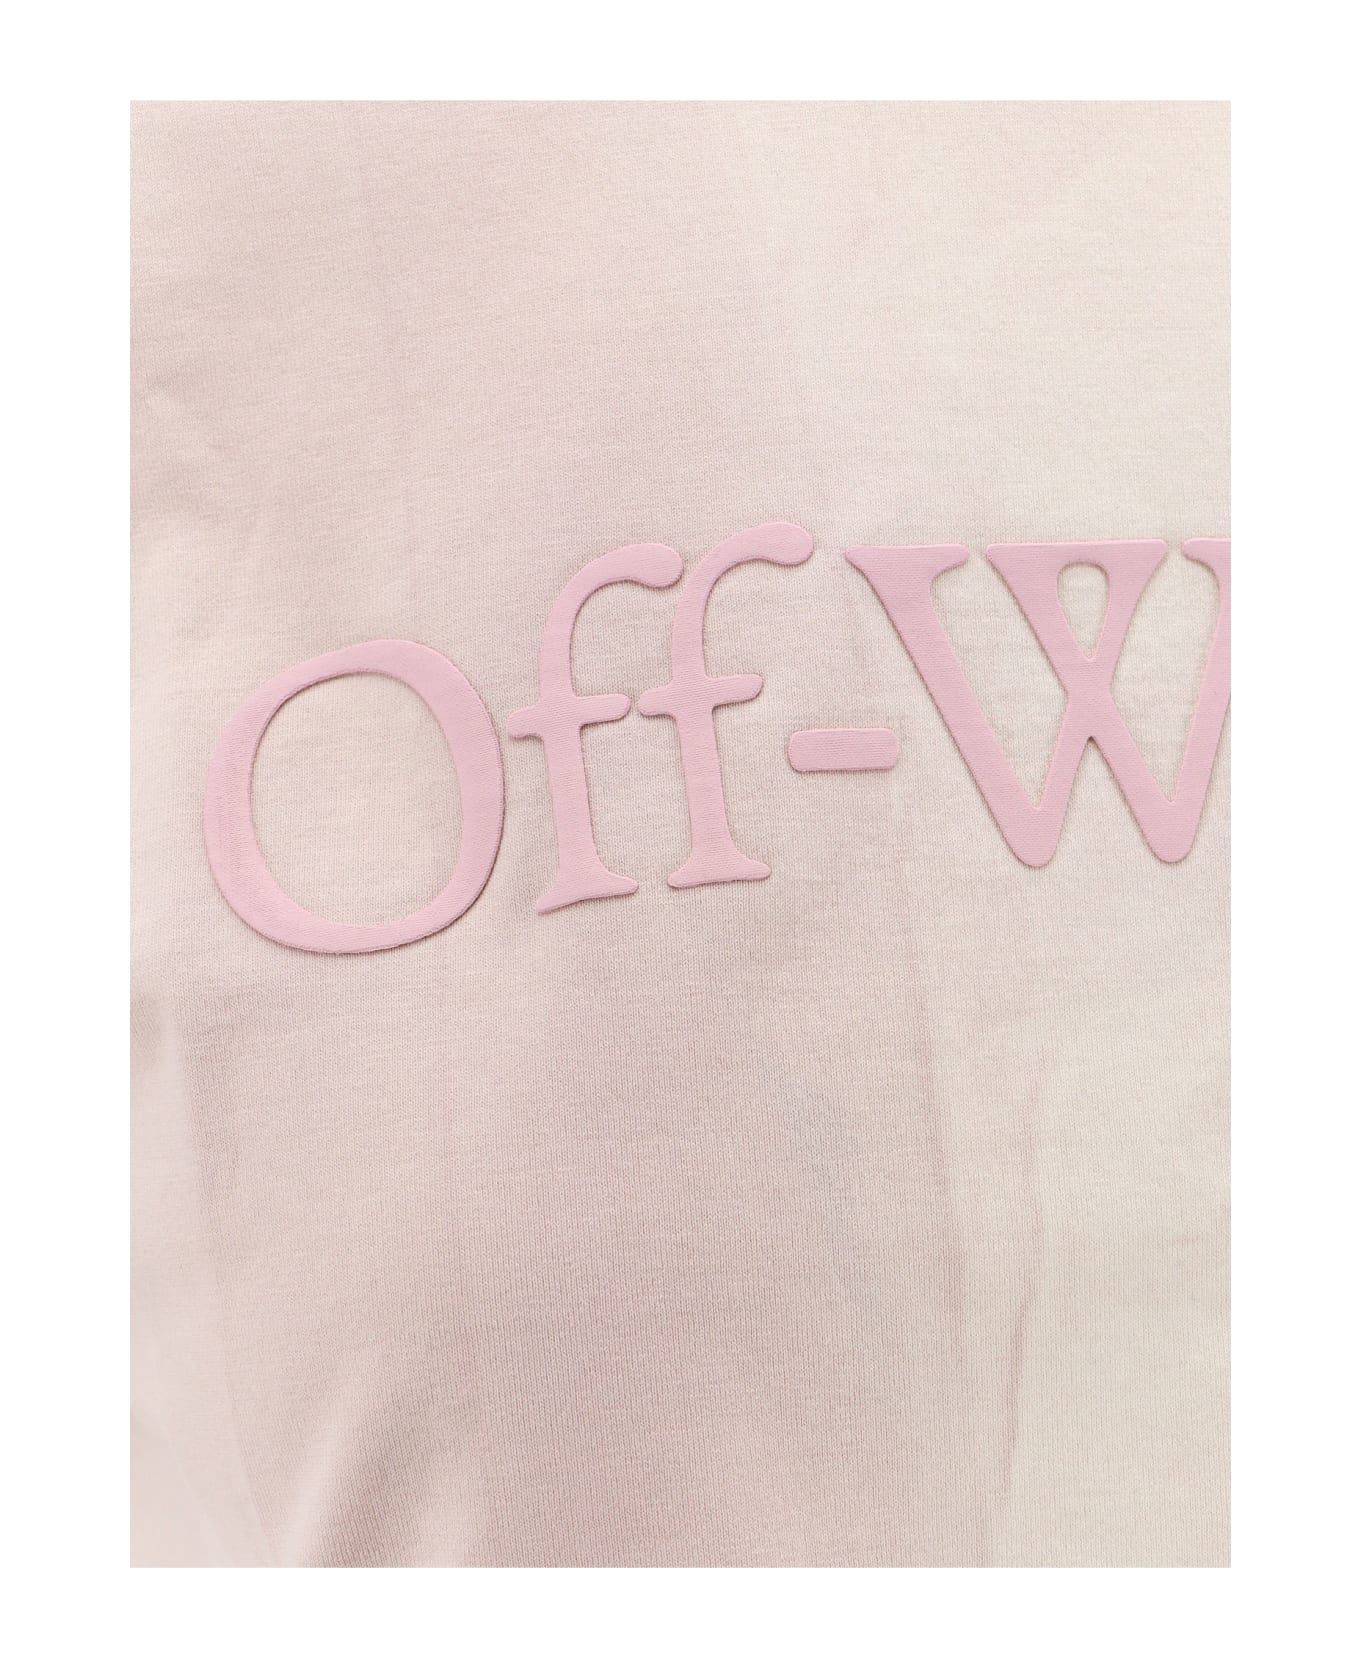 Off-White Laundry Cropped T-shirt - Pink